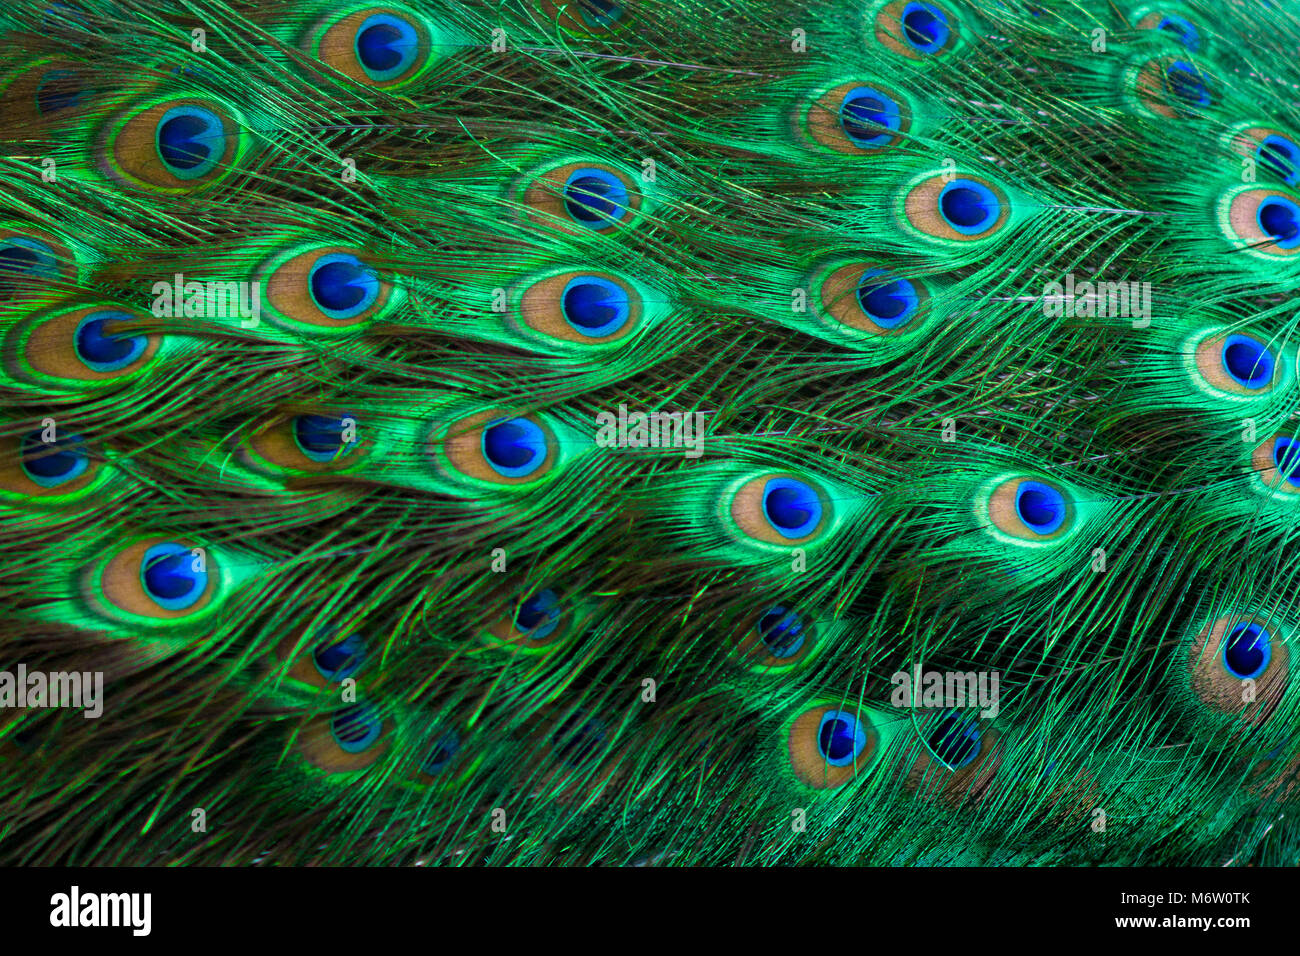 Peacock feathers Green Dot Pattern Blue Background Stock Photo - Alamy